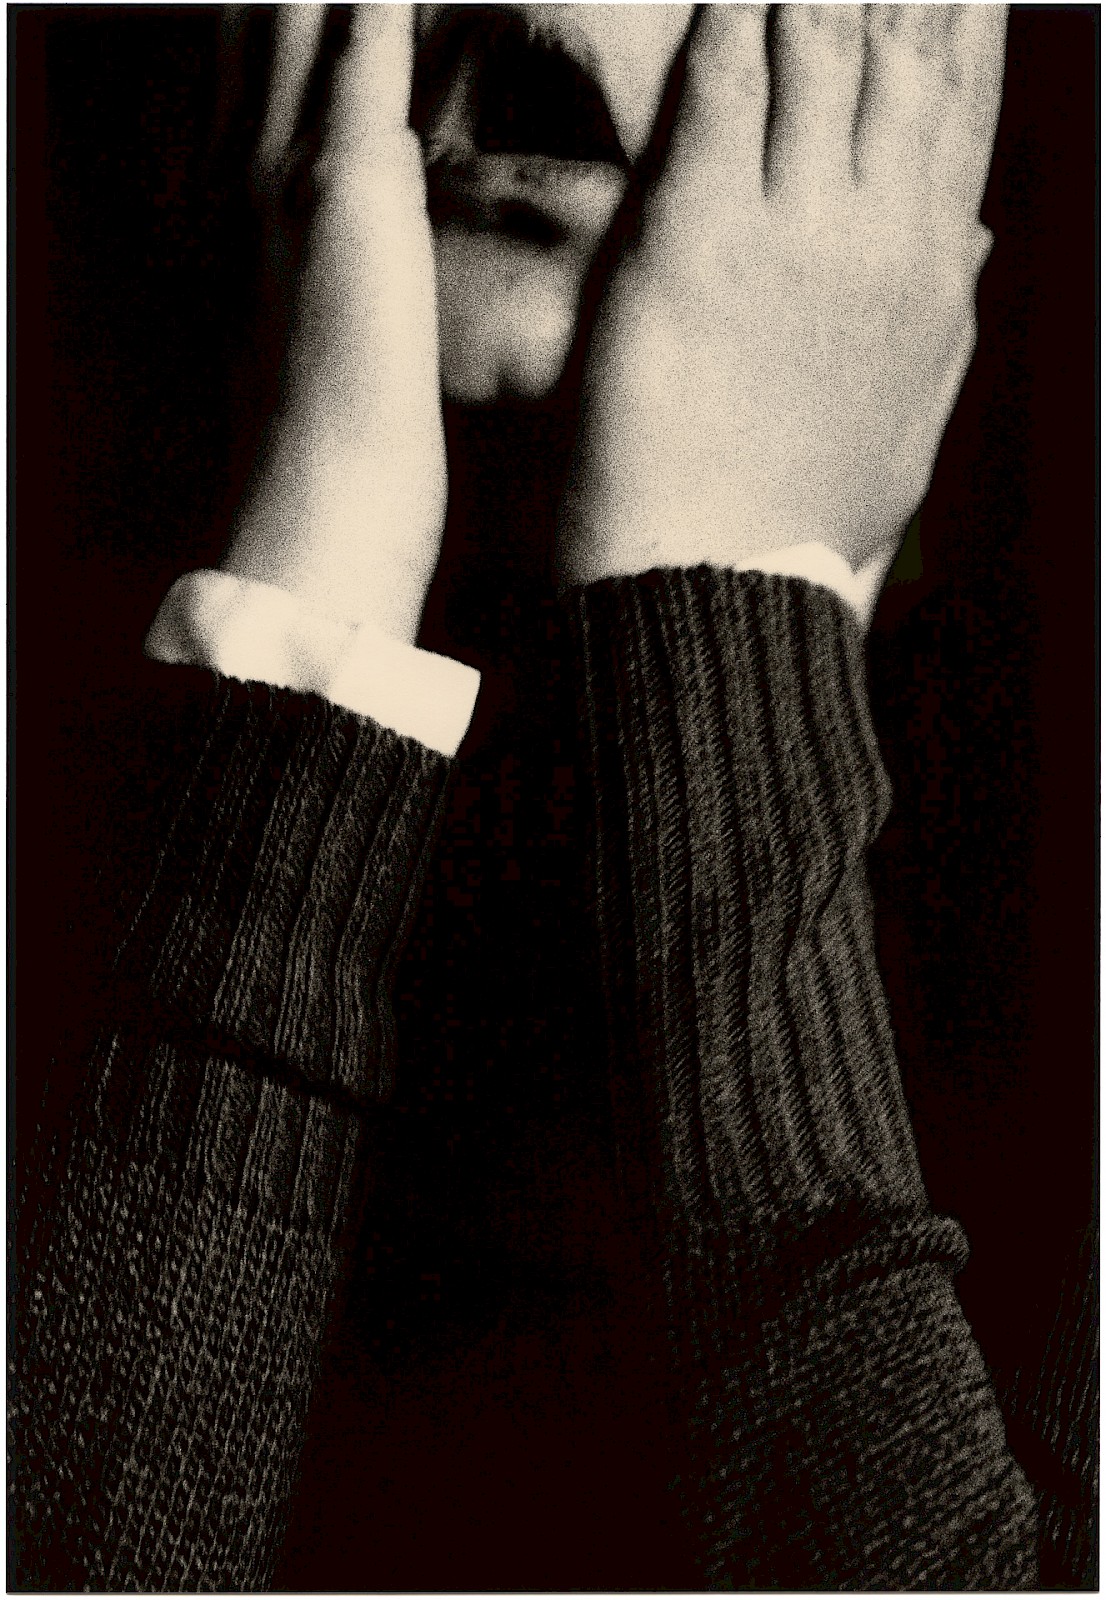 Untitled (hands and chin), silver gelatin photograph by Mikael Siirilä